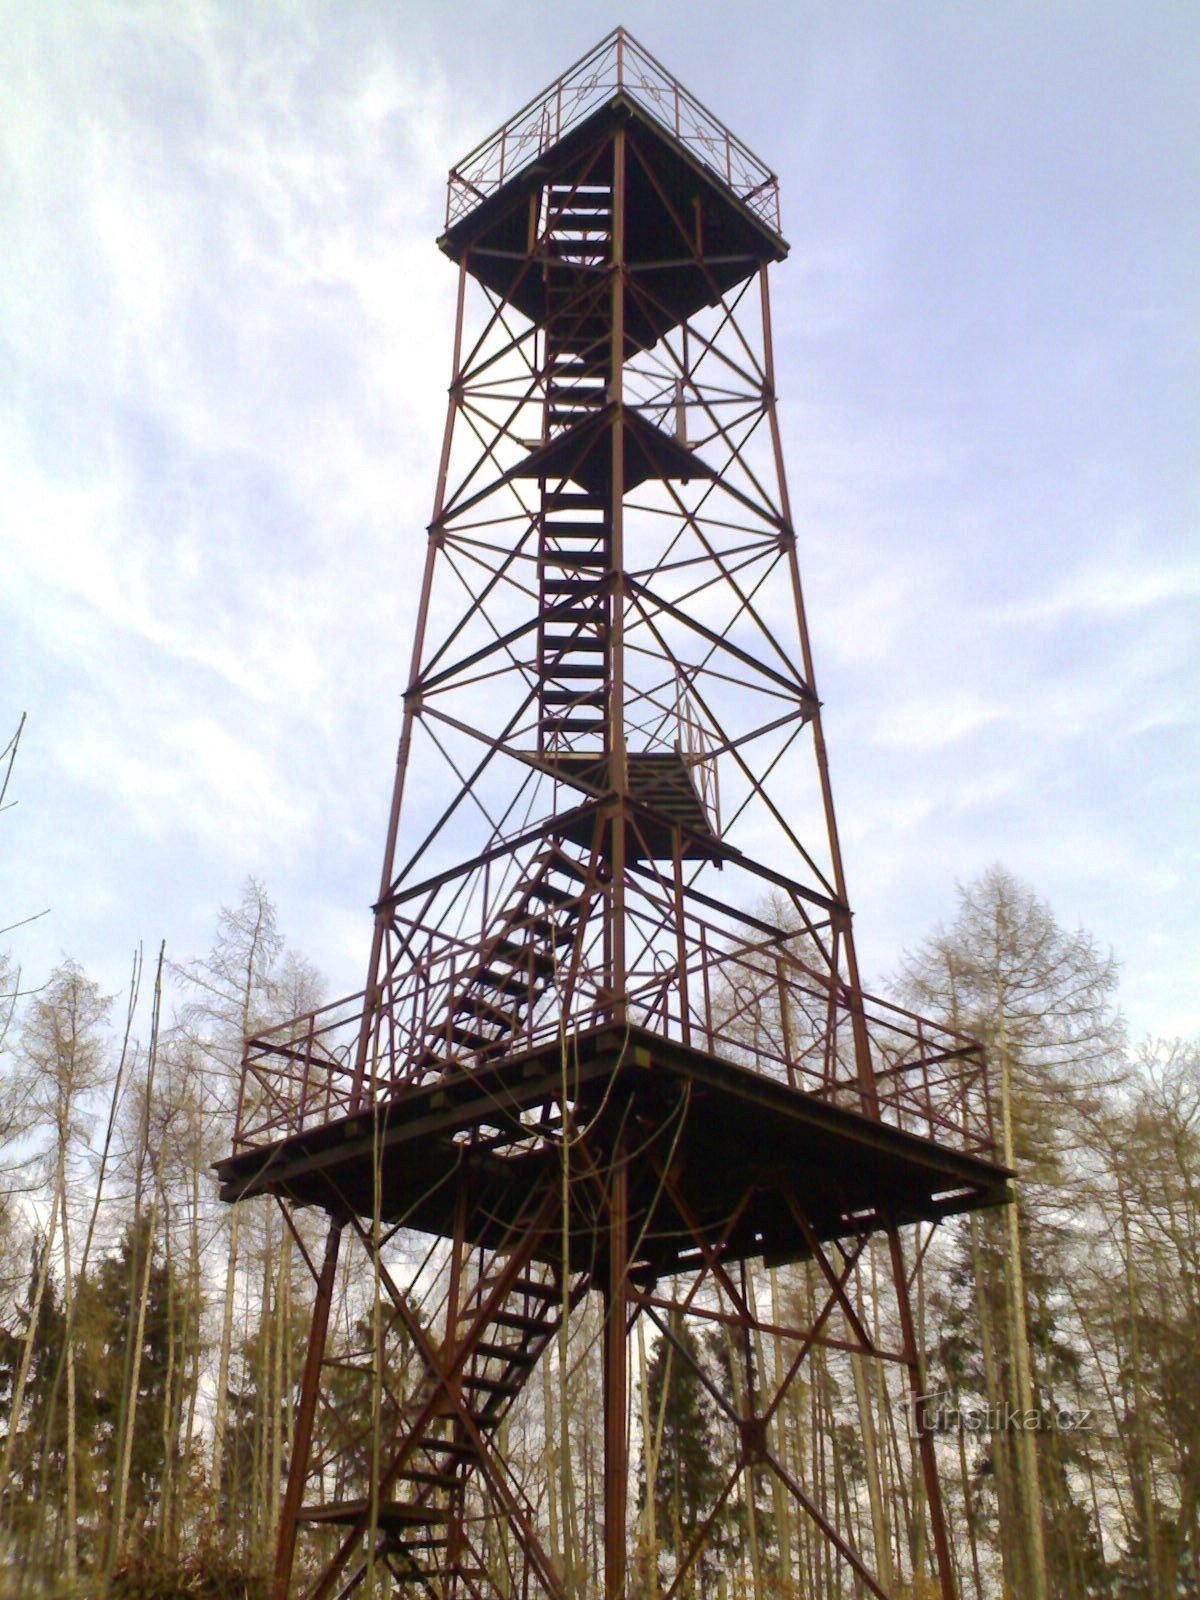 Libníkovice lookout tower